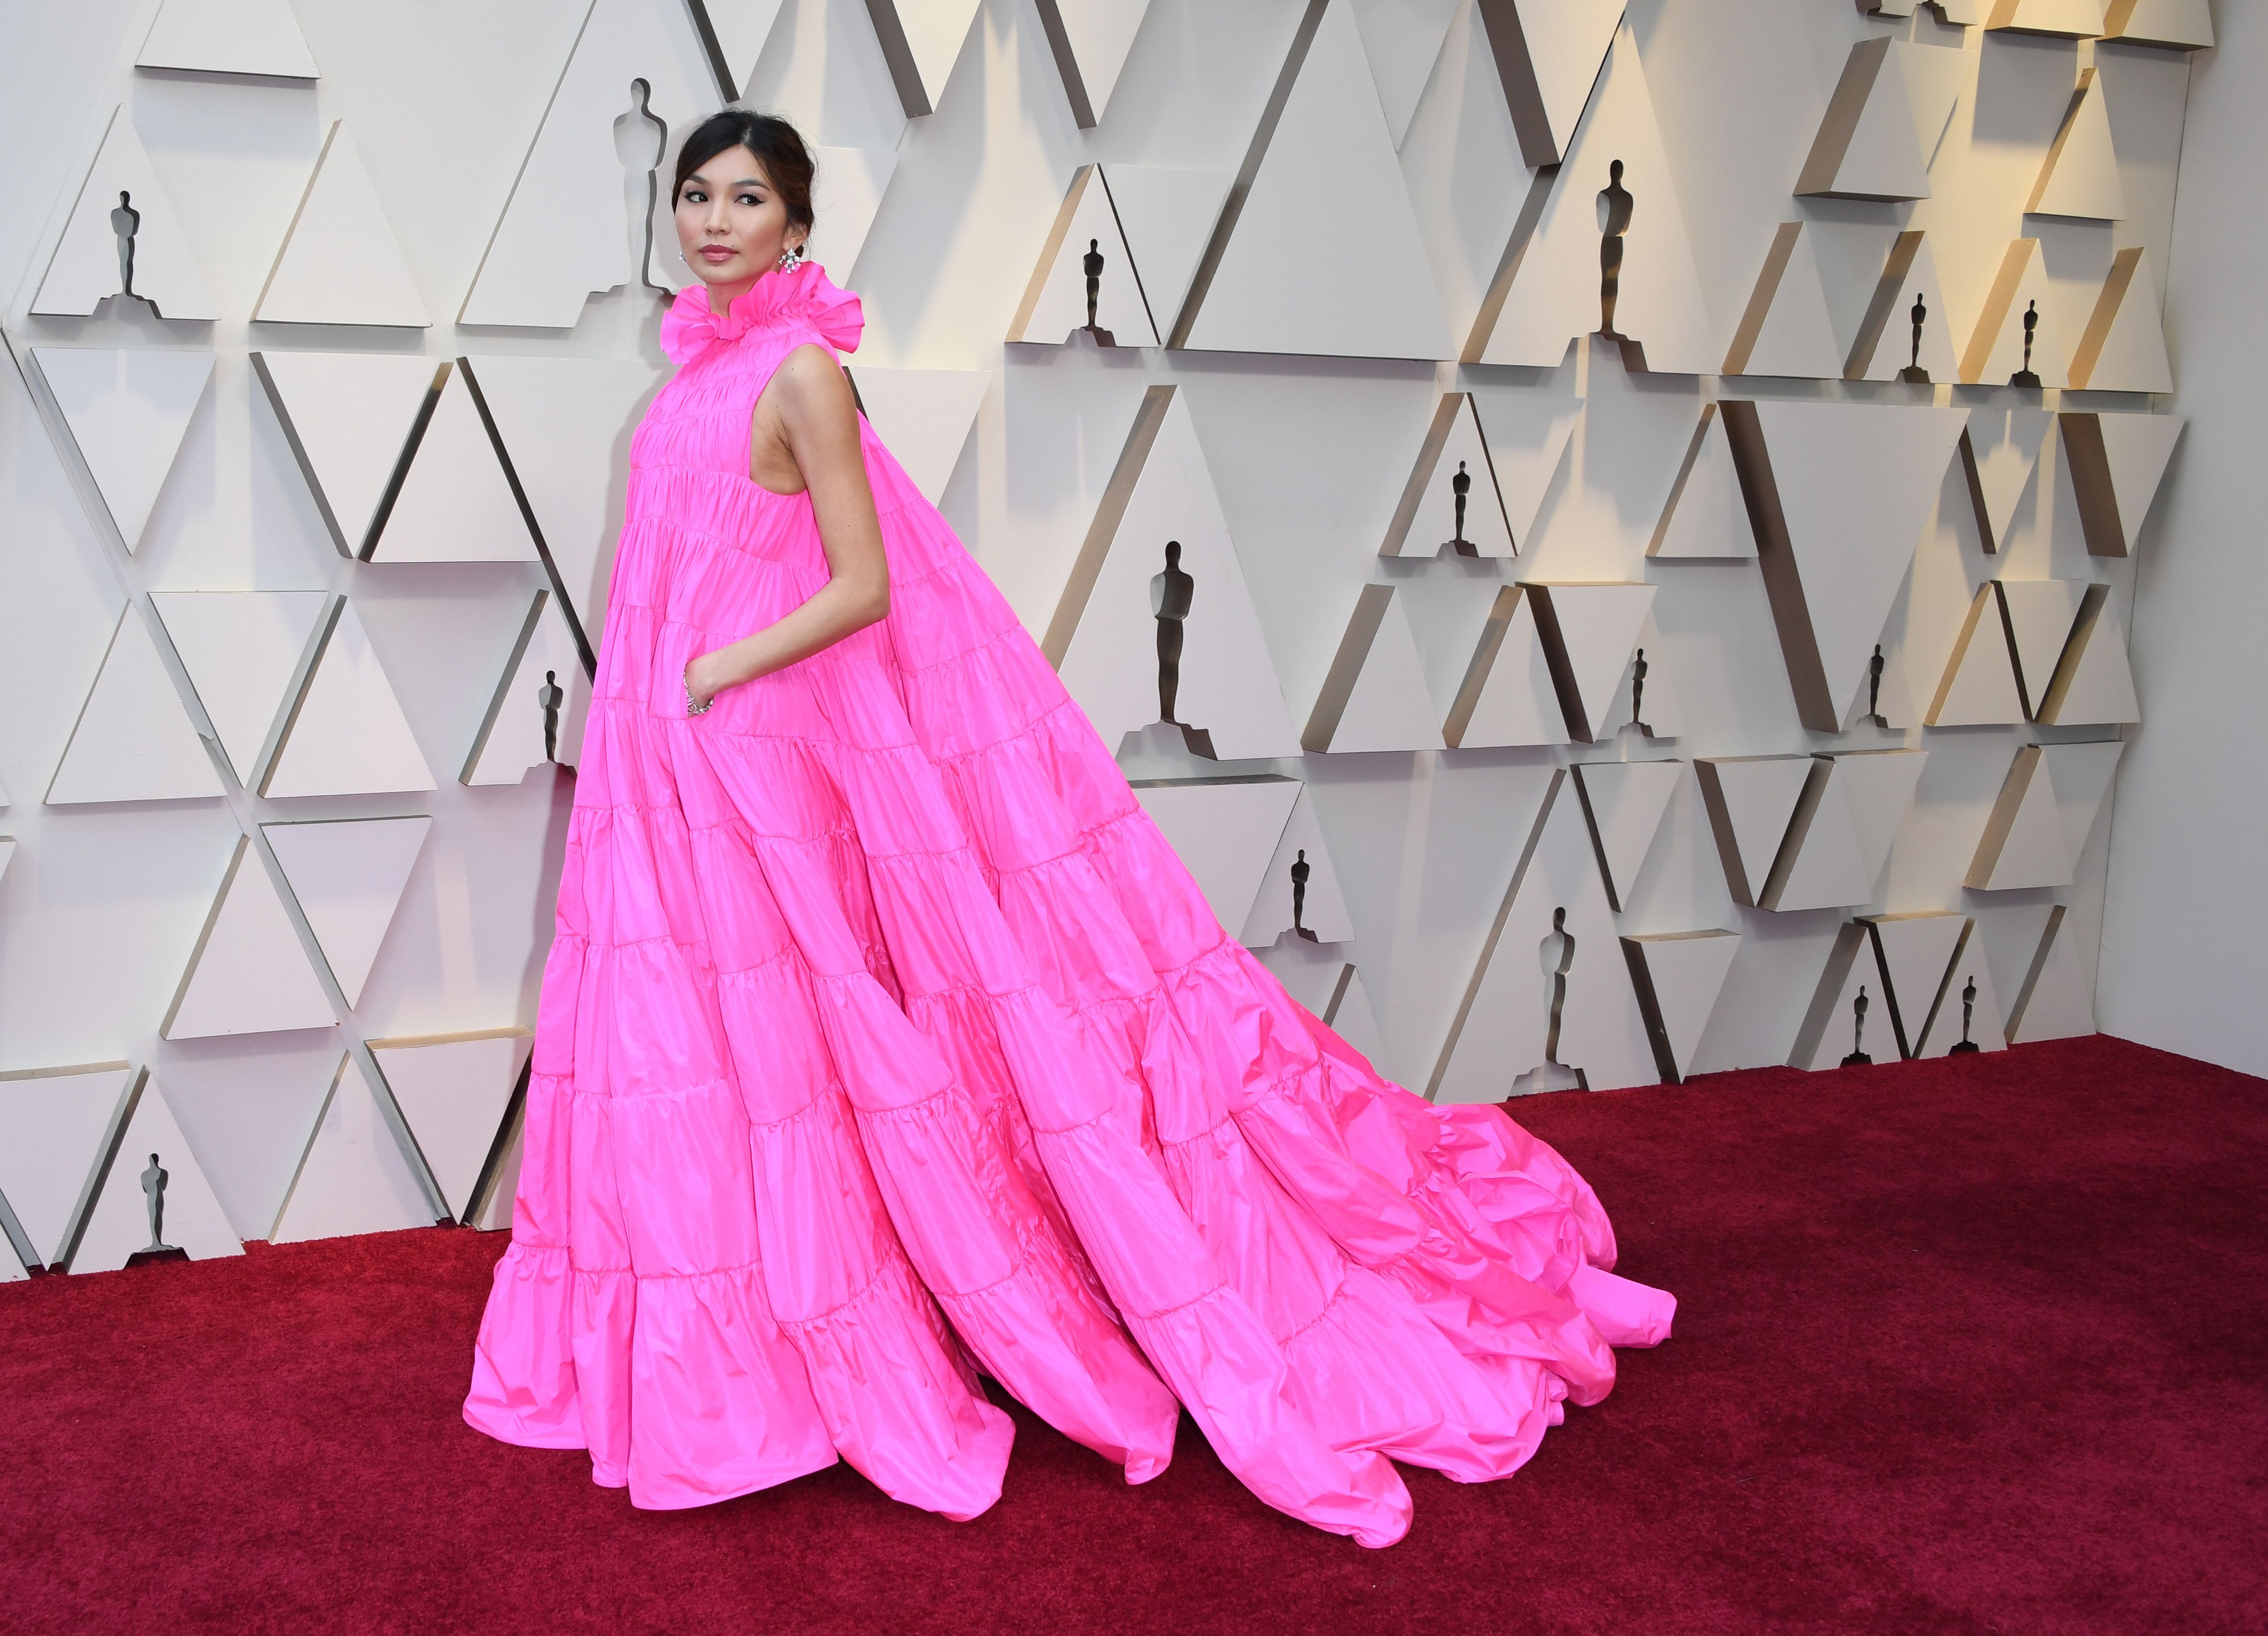 gowns at oscars 2019